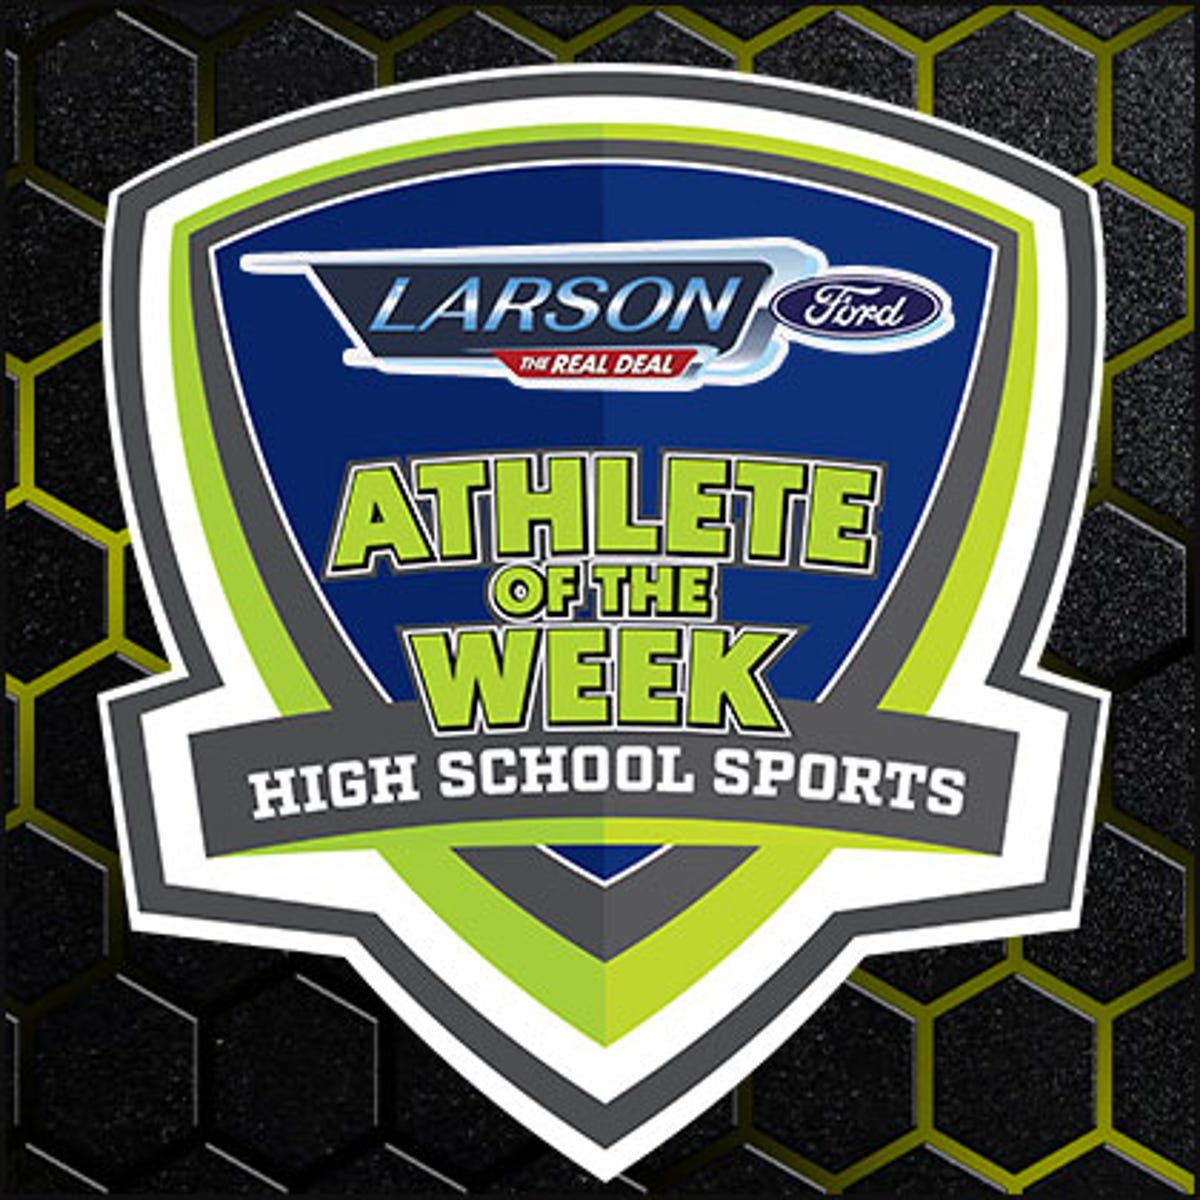 Vote for the Shore Baseball Player of the Week, Week 3. Sponsored by Larson Ford